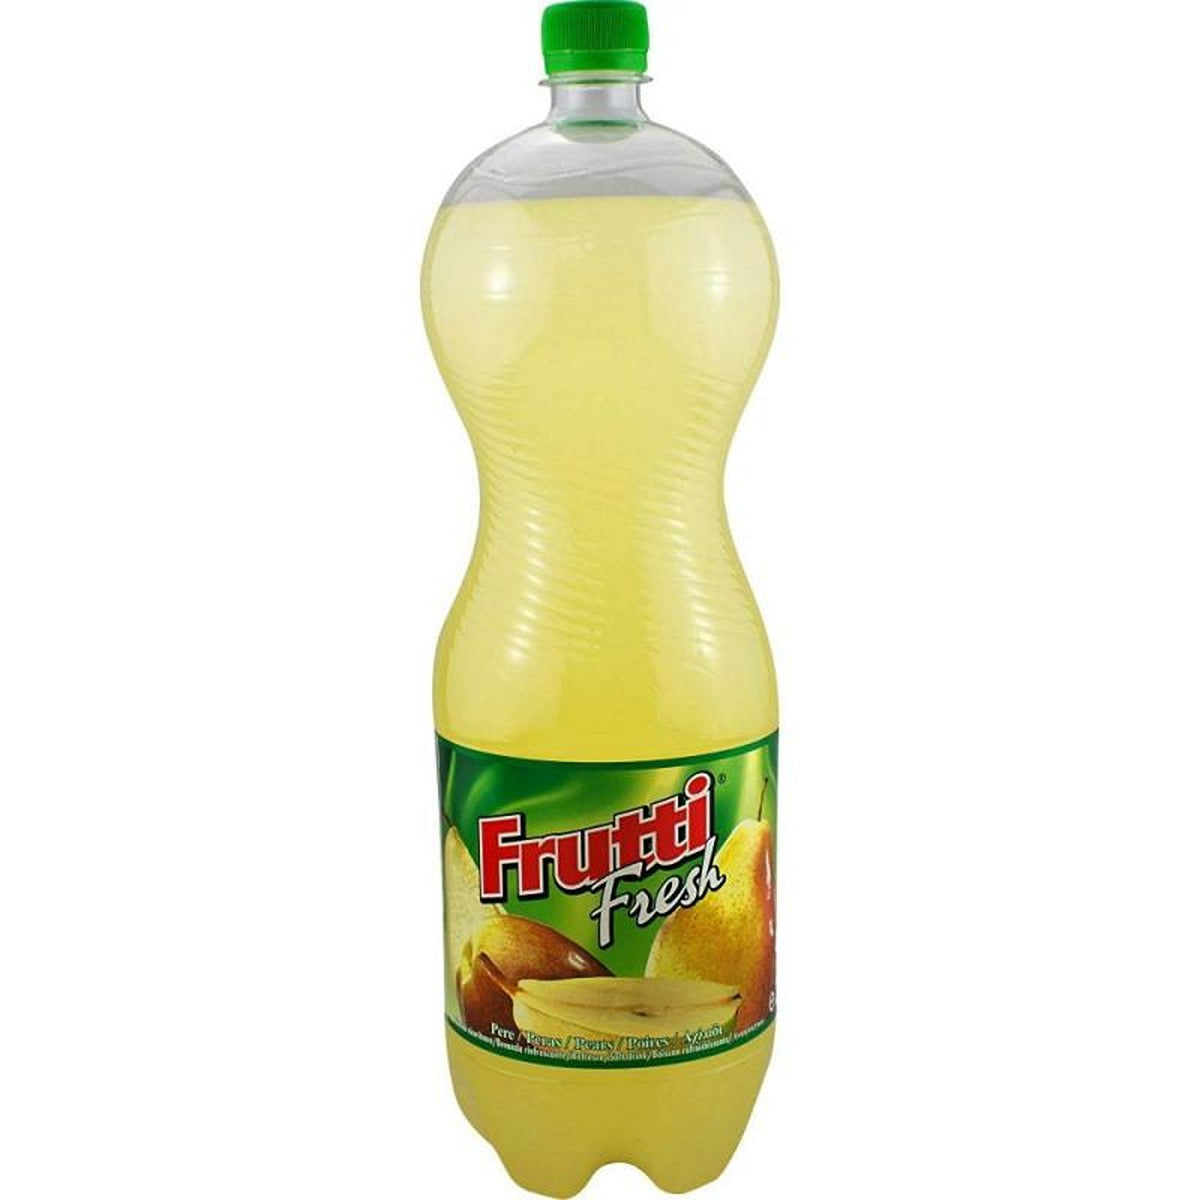 A bottle of Frutti Fresh - Pear Flavour Drink - 2L on a white background.